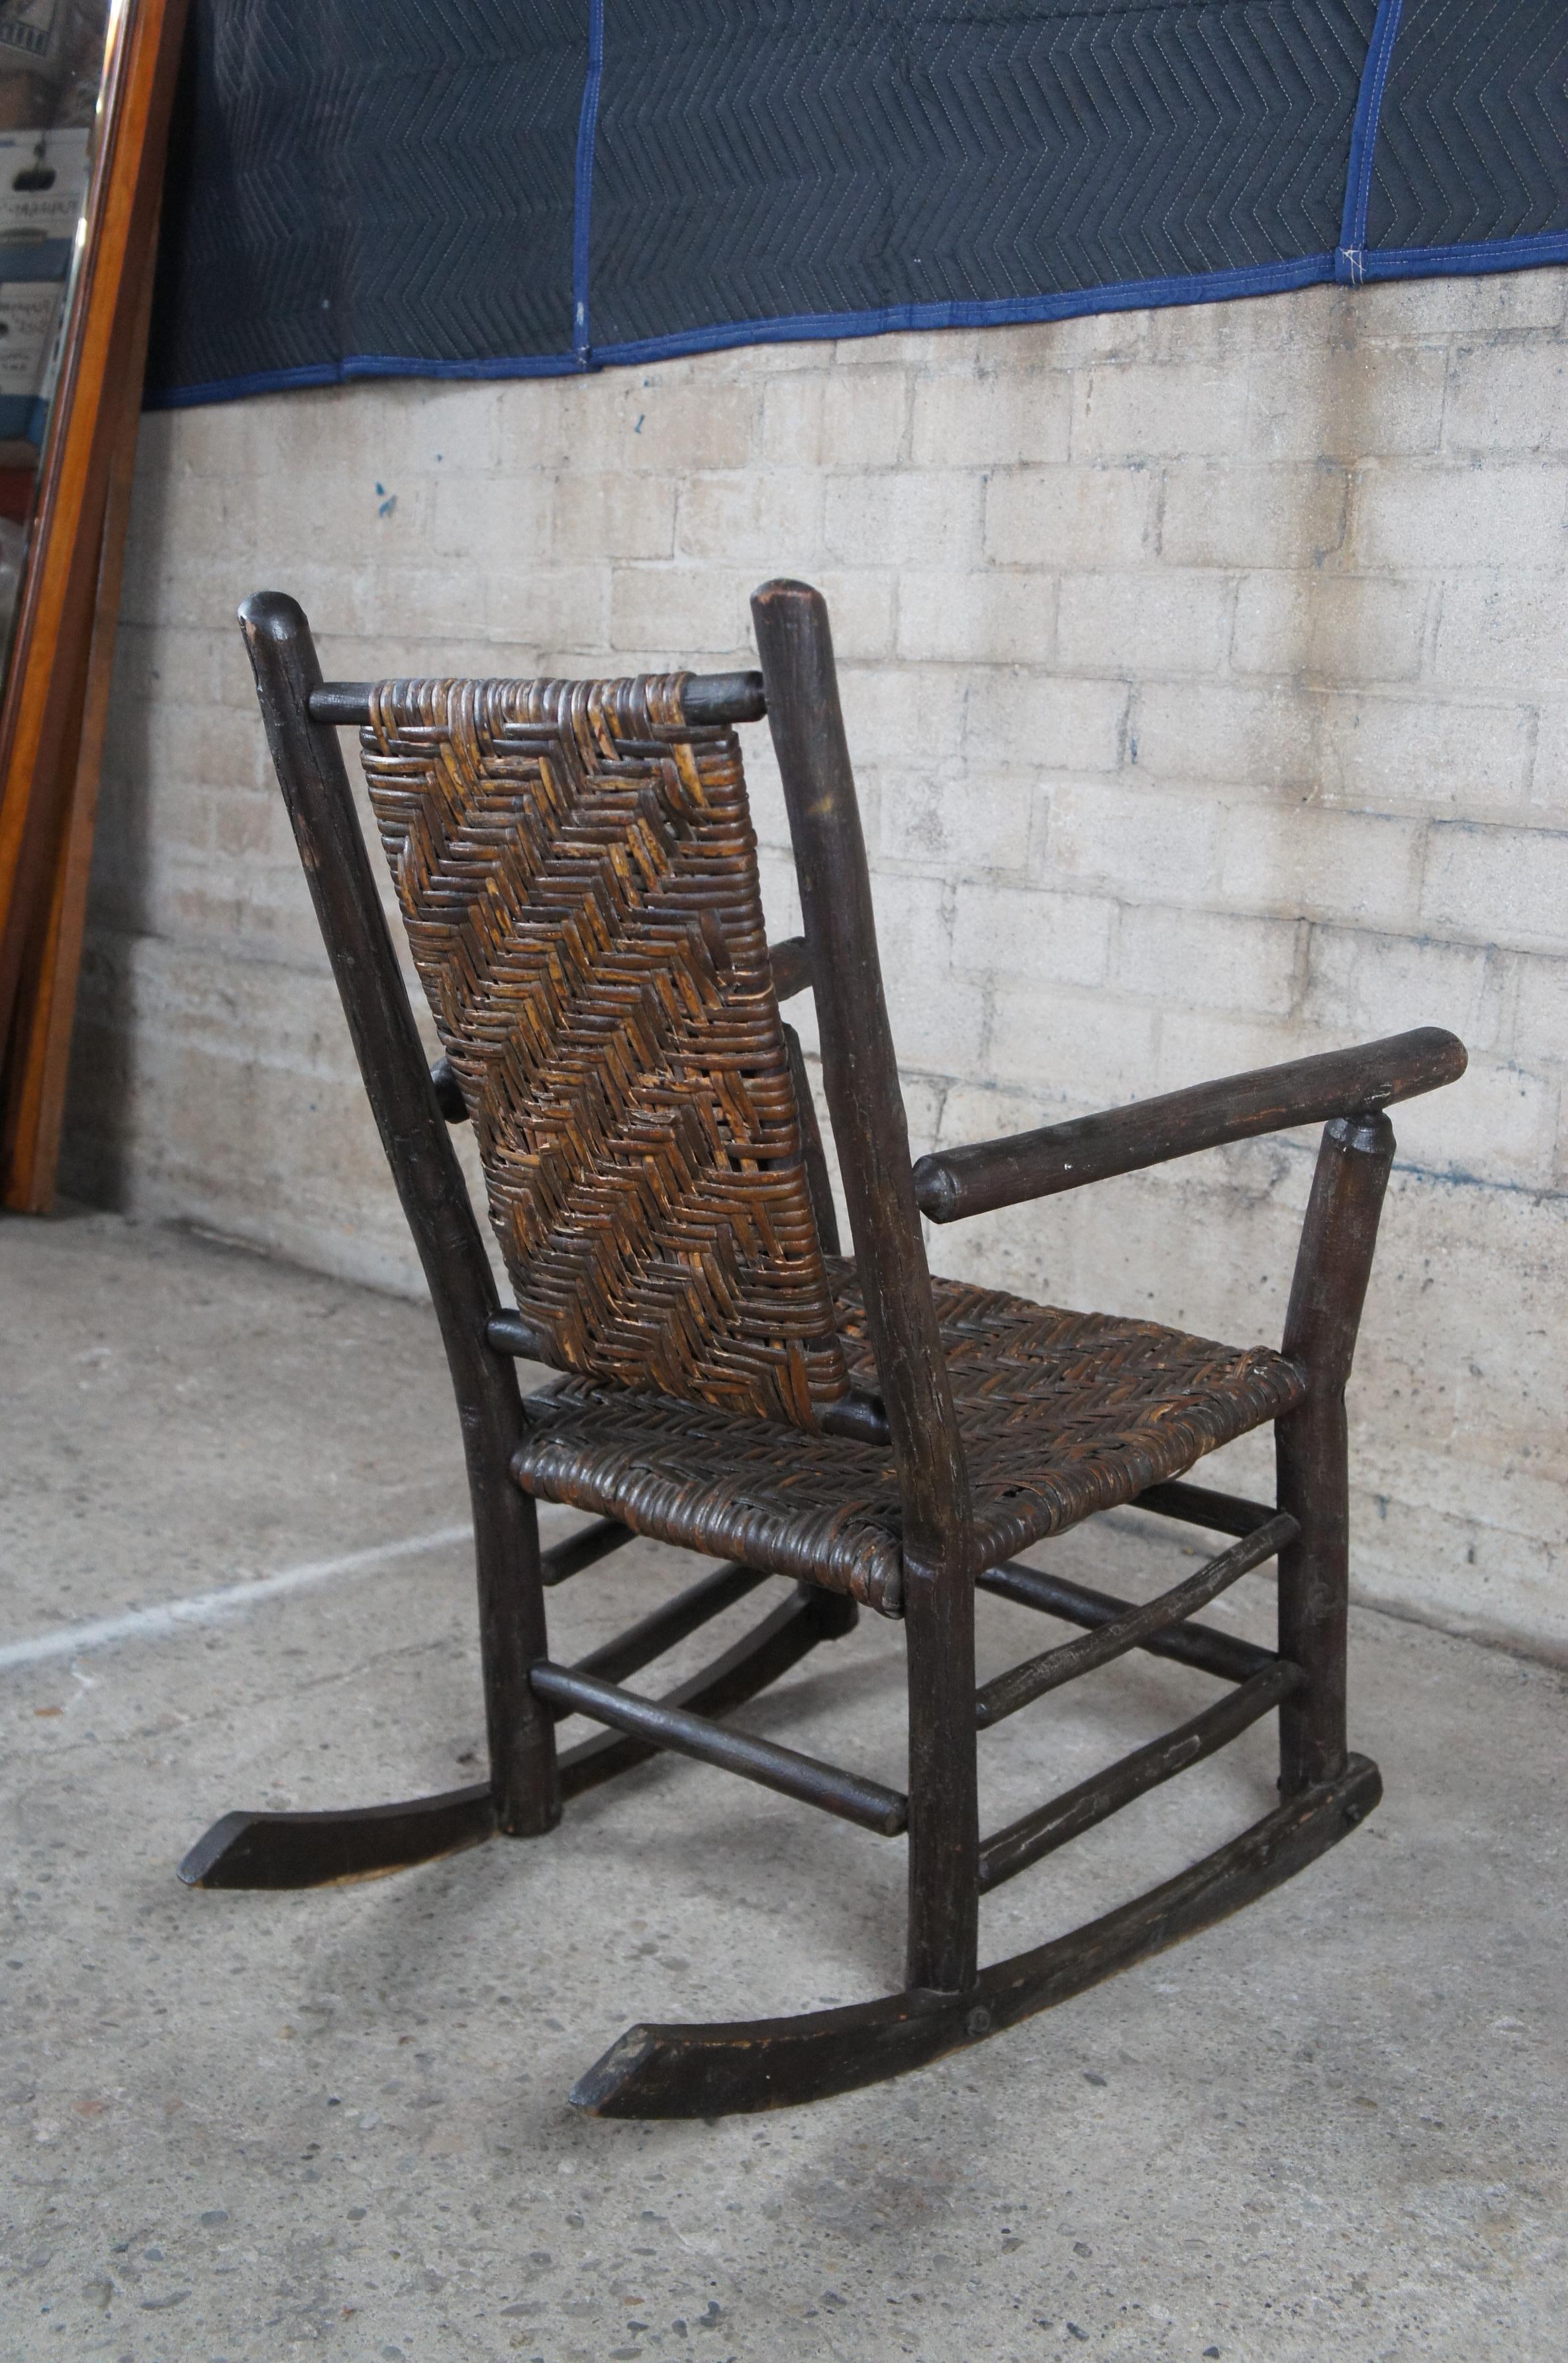 Mid-20th Century Antique Old Hickory Furniture Rocking Arm Chair No. 21 Rocker Adirondack Lodge